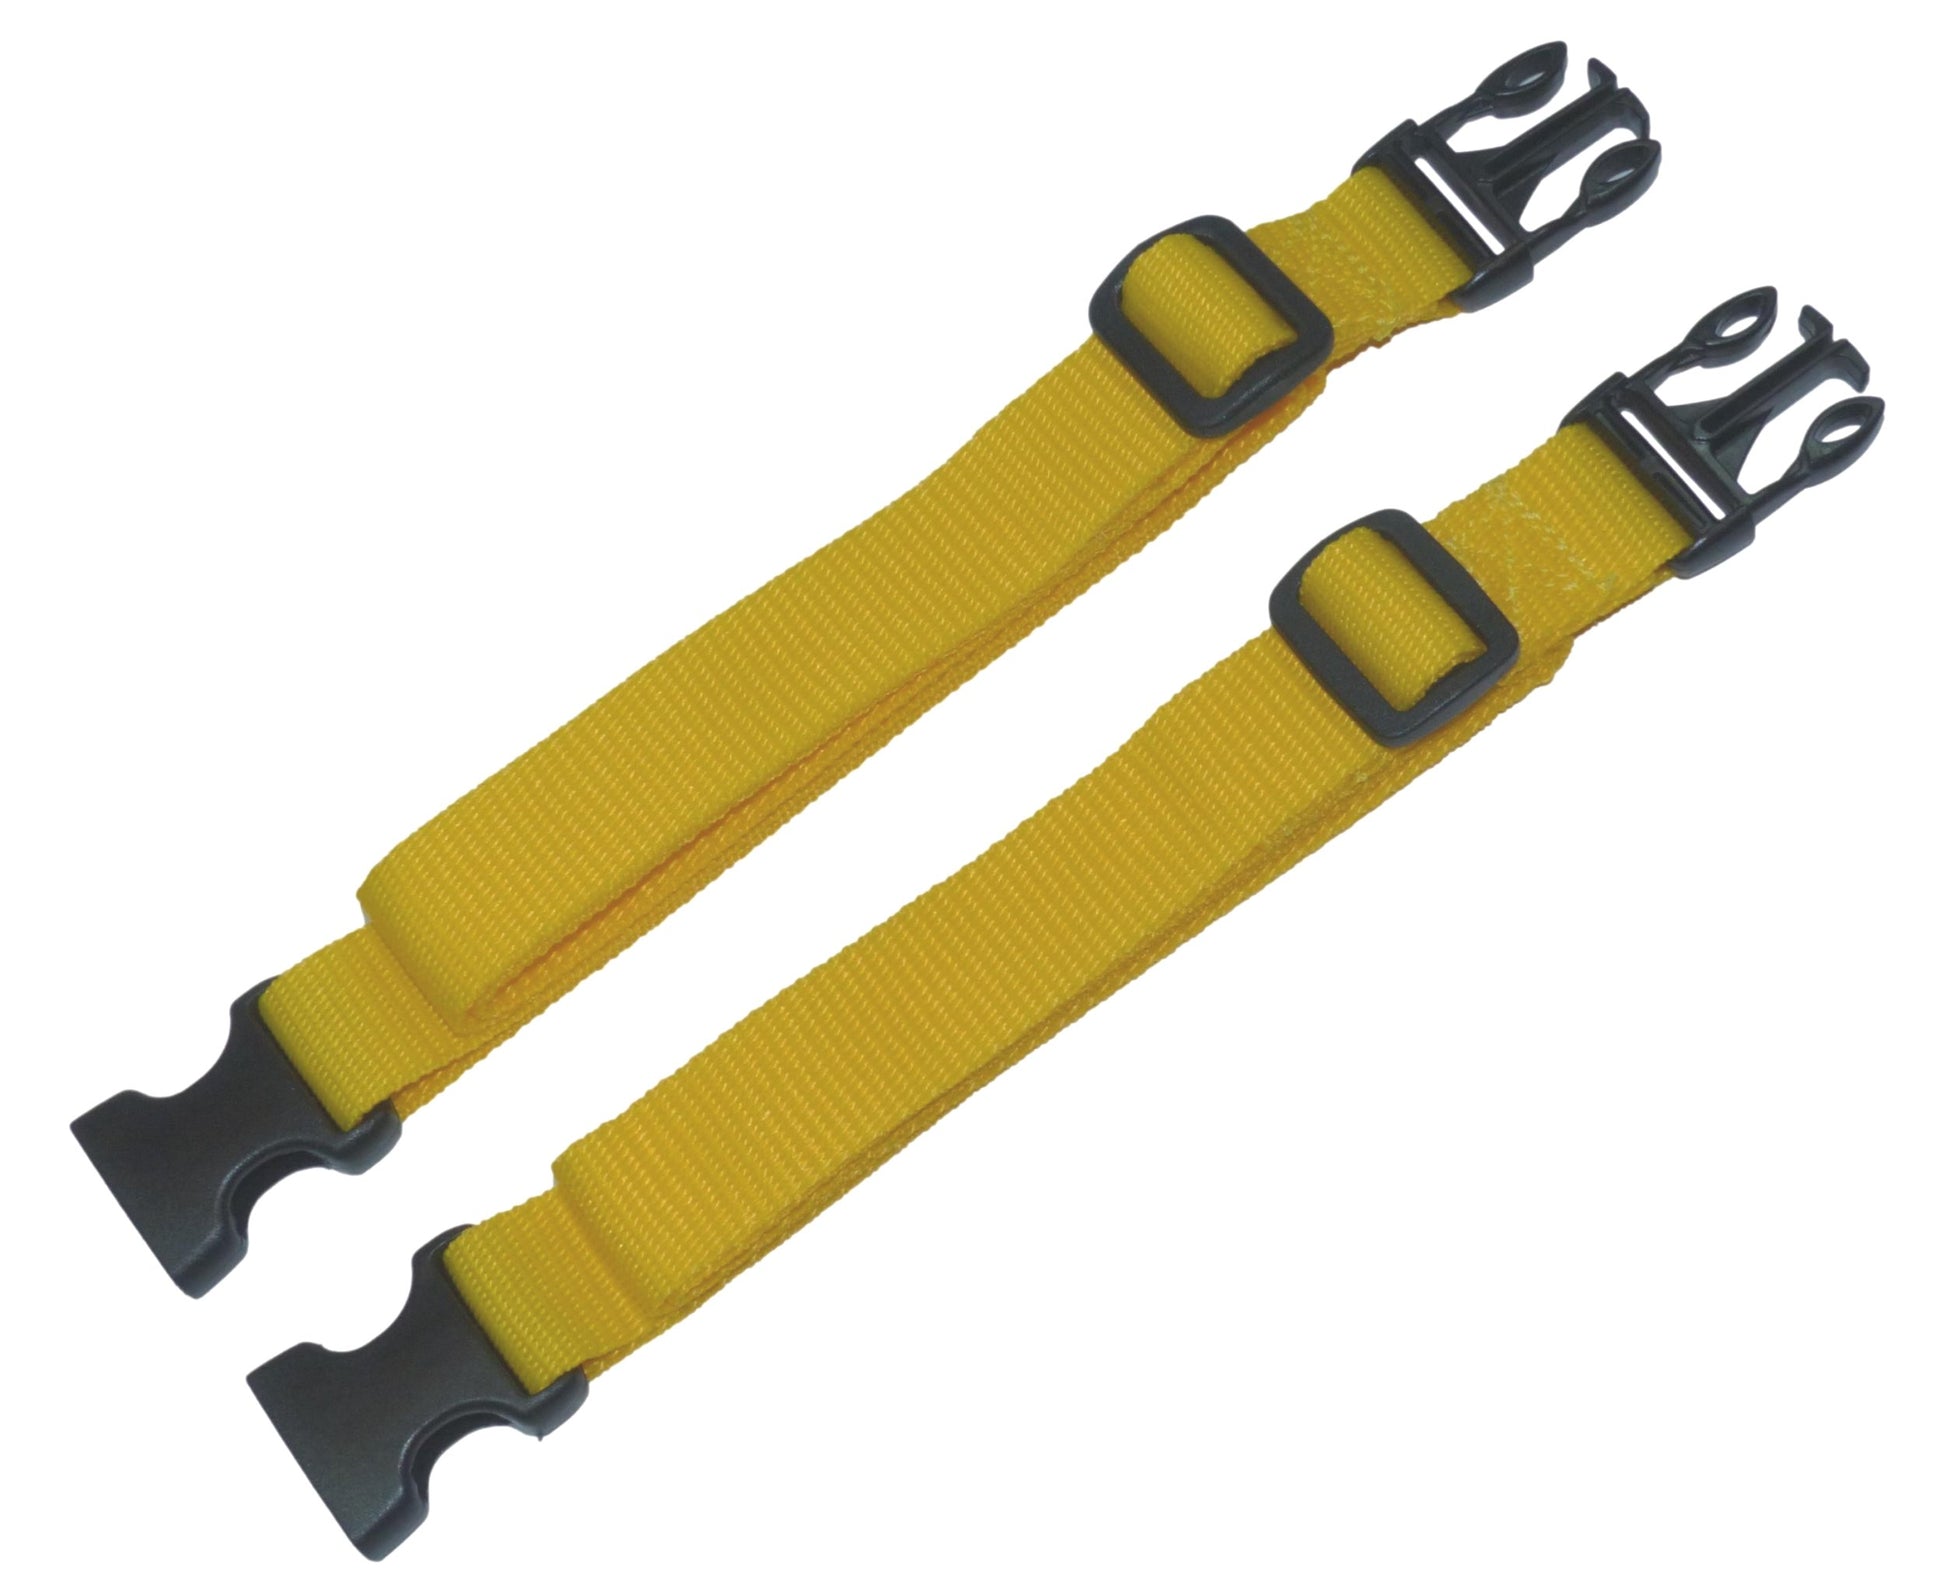 25mm Webbing Strap with Quick Release & Length-Adjusting Buckles (Pair) in yellow